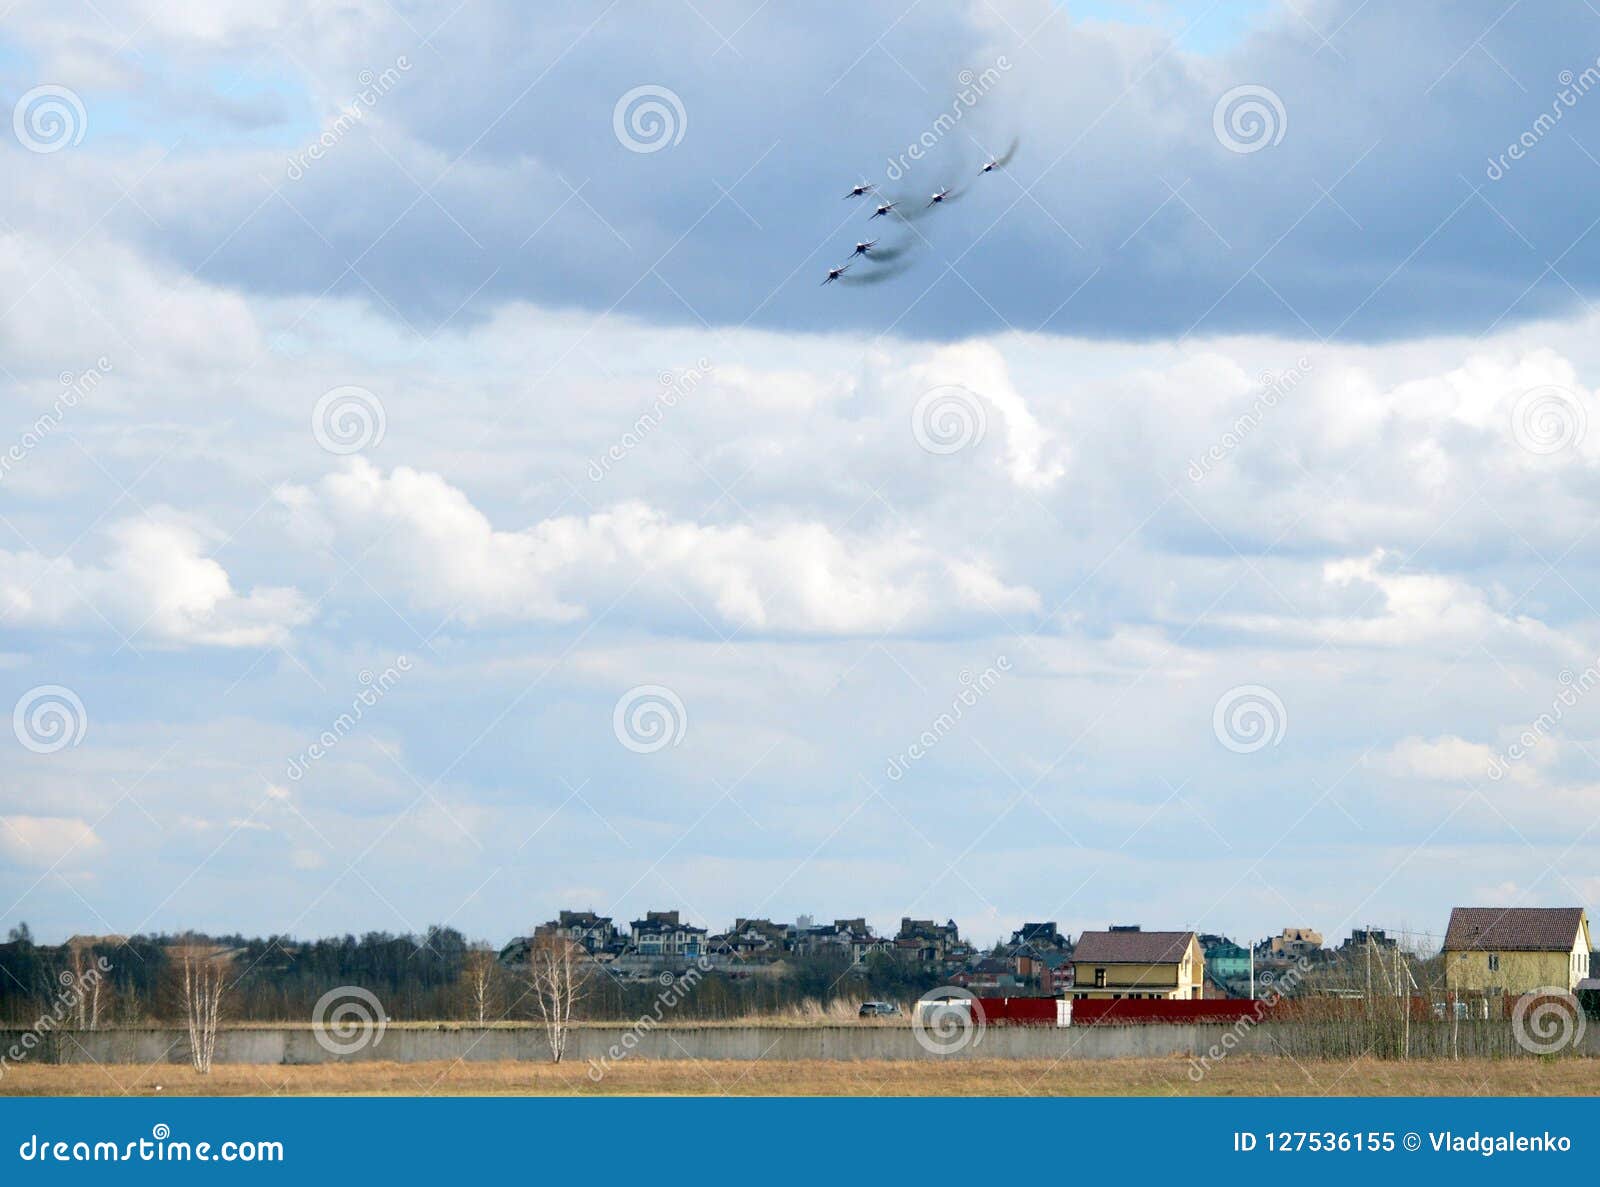 the performance of the strizhi aerobatic team on the multi-purpose highly maneuverable mig-29 fighters over the myachkovo airfield